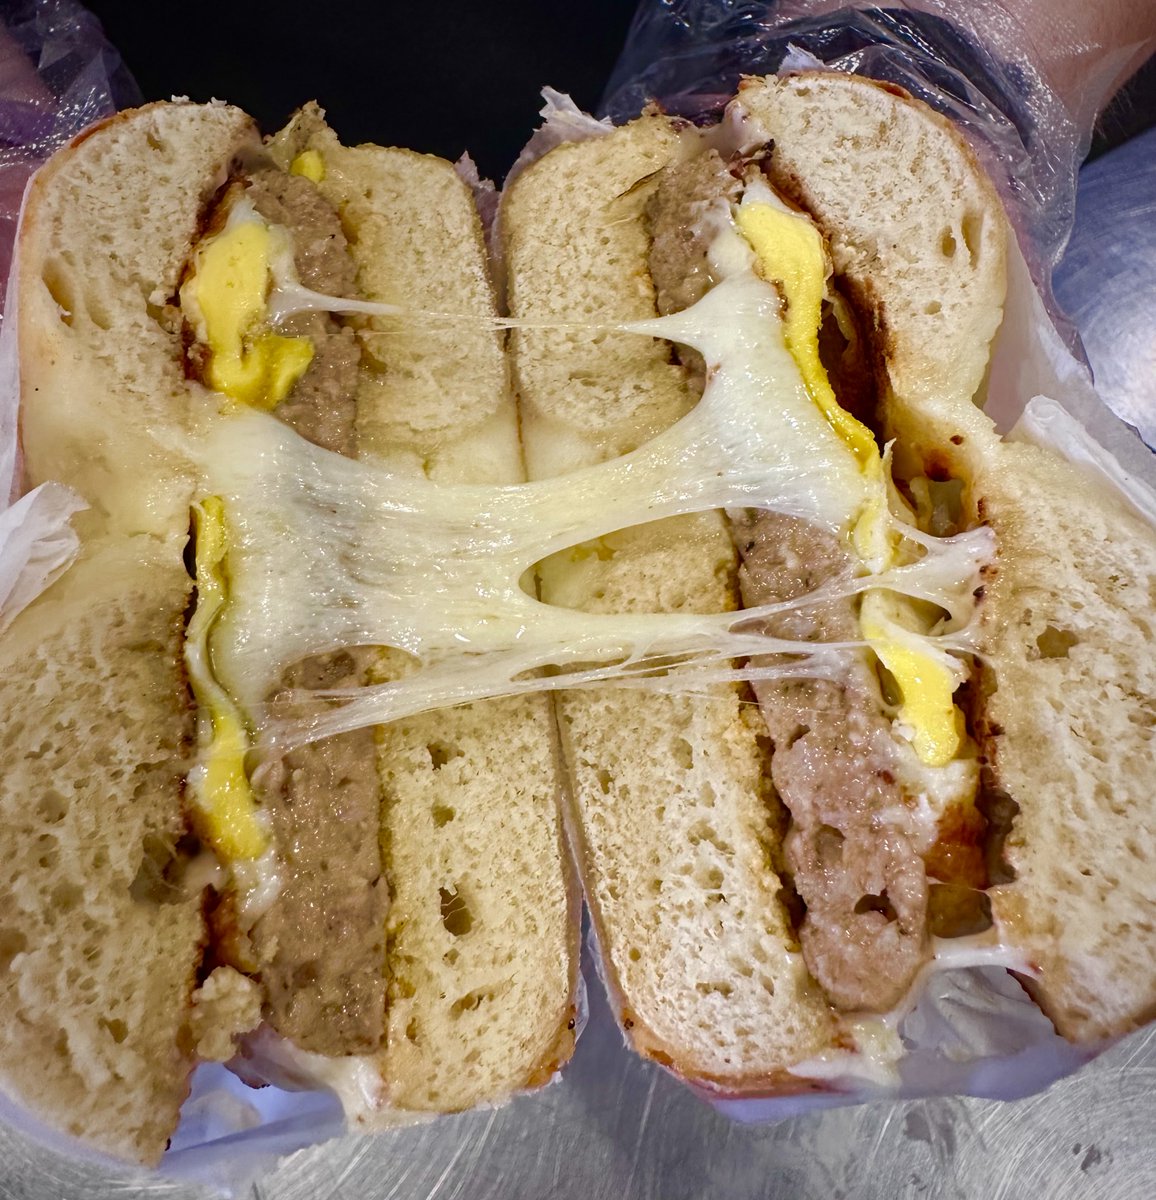 Get a load of that cheese pull! 🤤🧀 American, cheddar, gouda, and more! 

... 

#bbcbagel #bagel #bloomington #indianauniversity #iubloomington #iu #cheesey #cheesepull #localfoods #lunch #breakfast